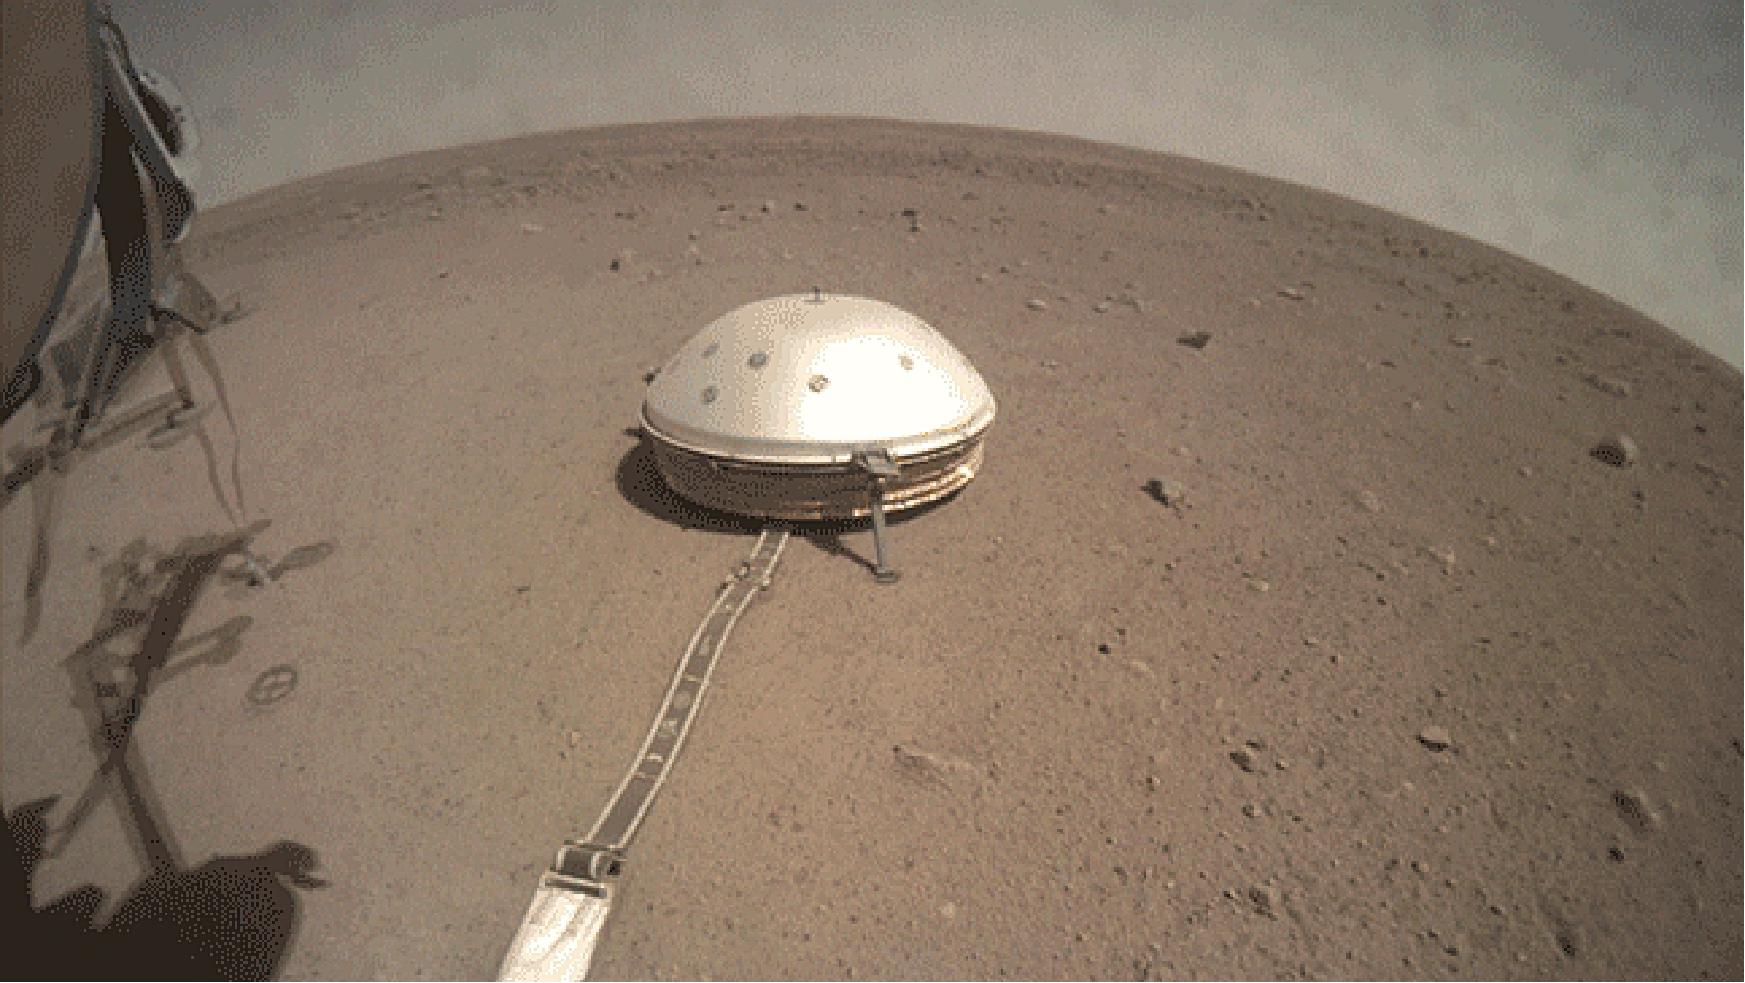 Figure 41: On 28 June 2019, NASA's InSight lander used its robotic arm to move the support structure for its digging instrument, informally called the "mole." This view was captured by the fisheye Instrument Context Camera under the lander's deck (image credit: NASA/JPL- Caltech)